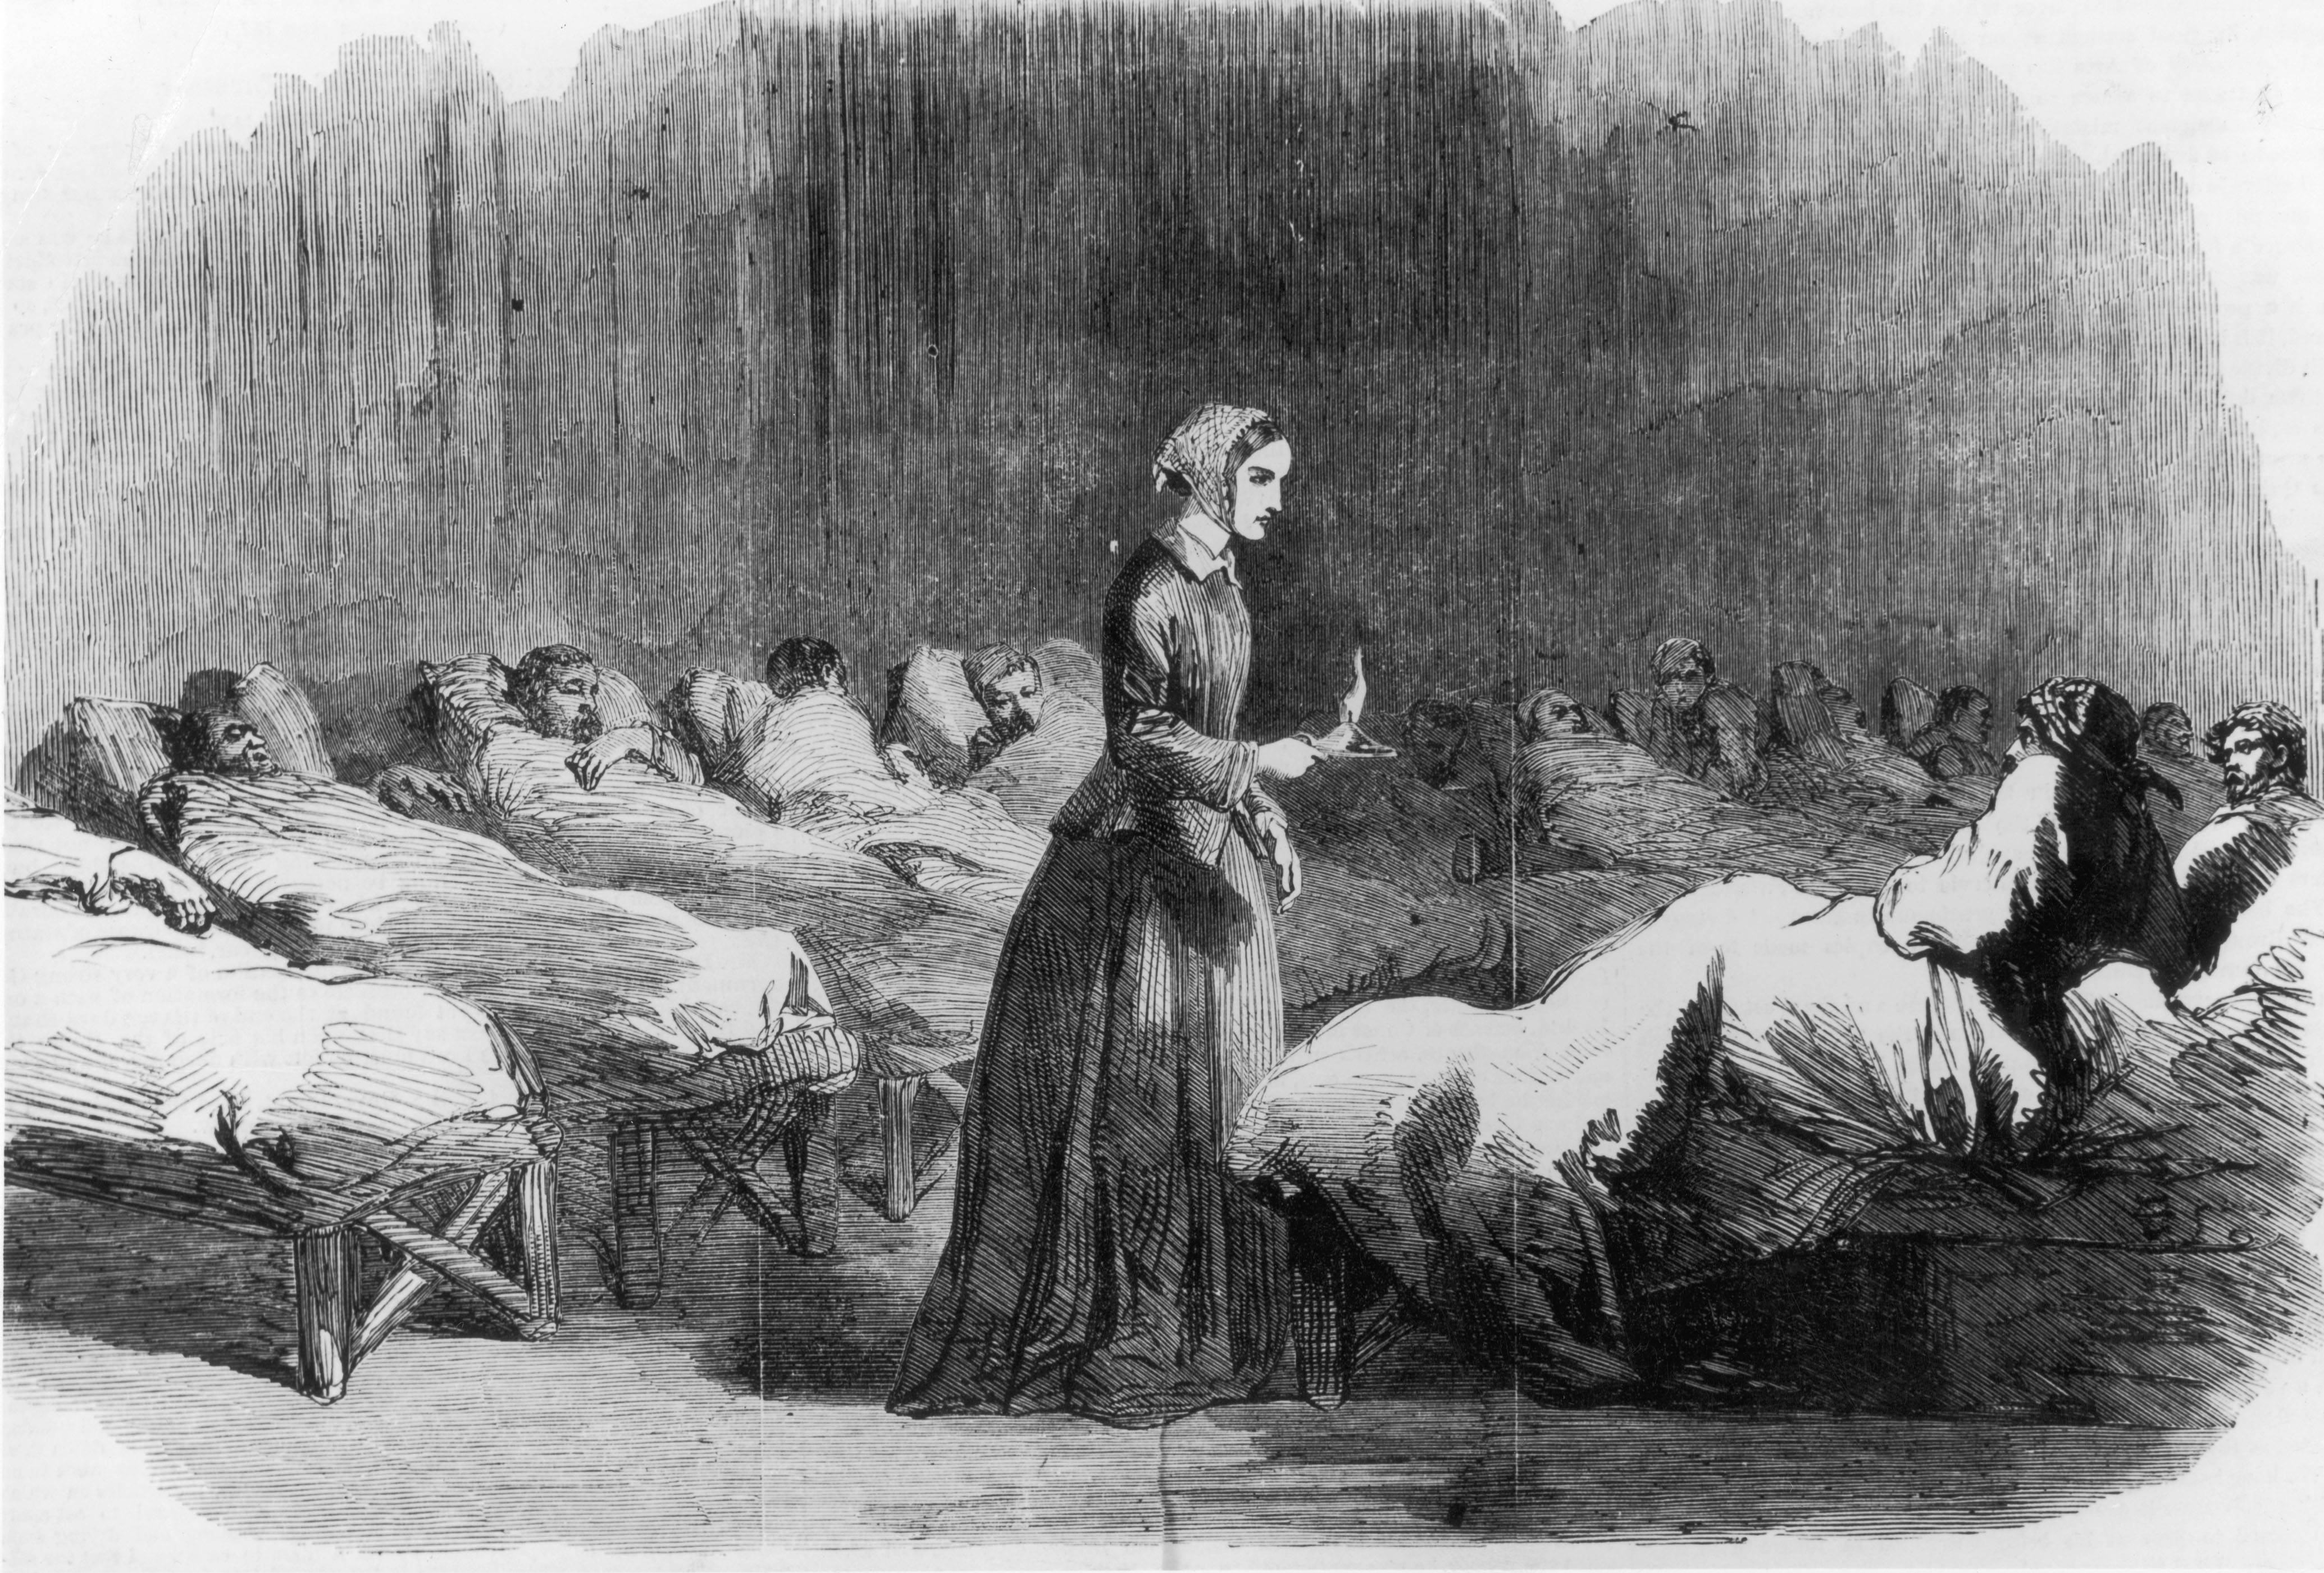 Florence Nightingale looks in on her patients